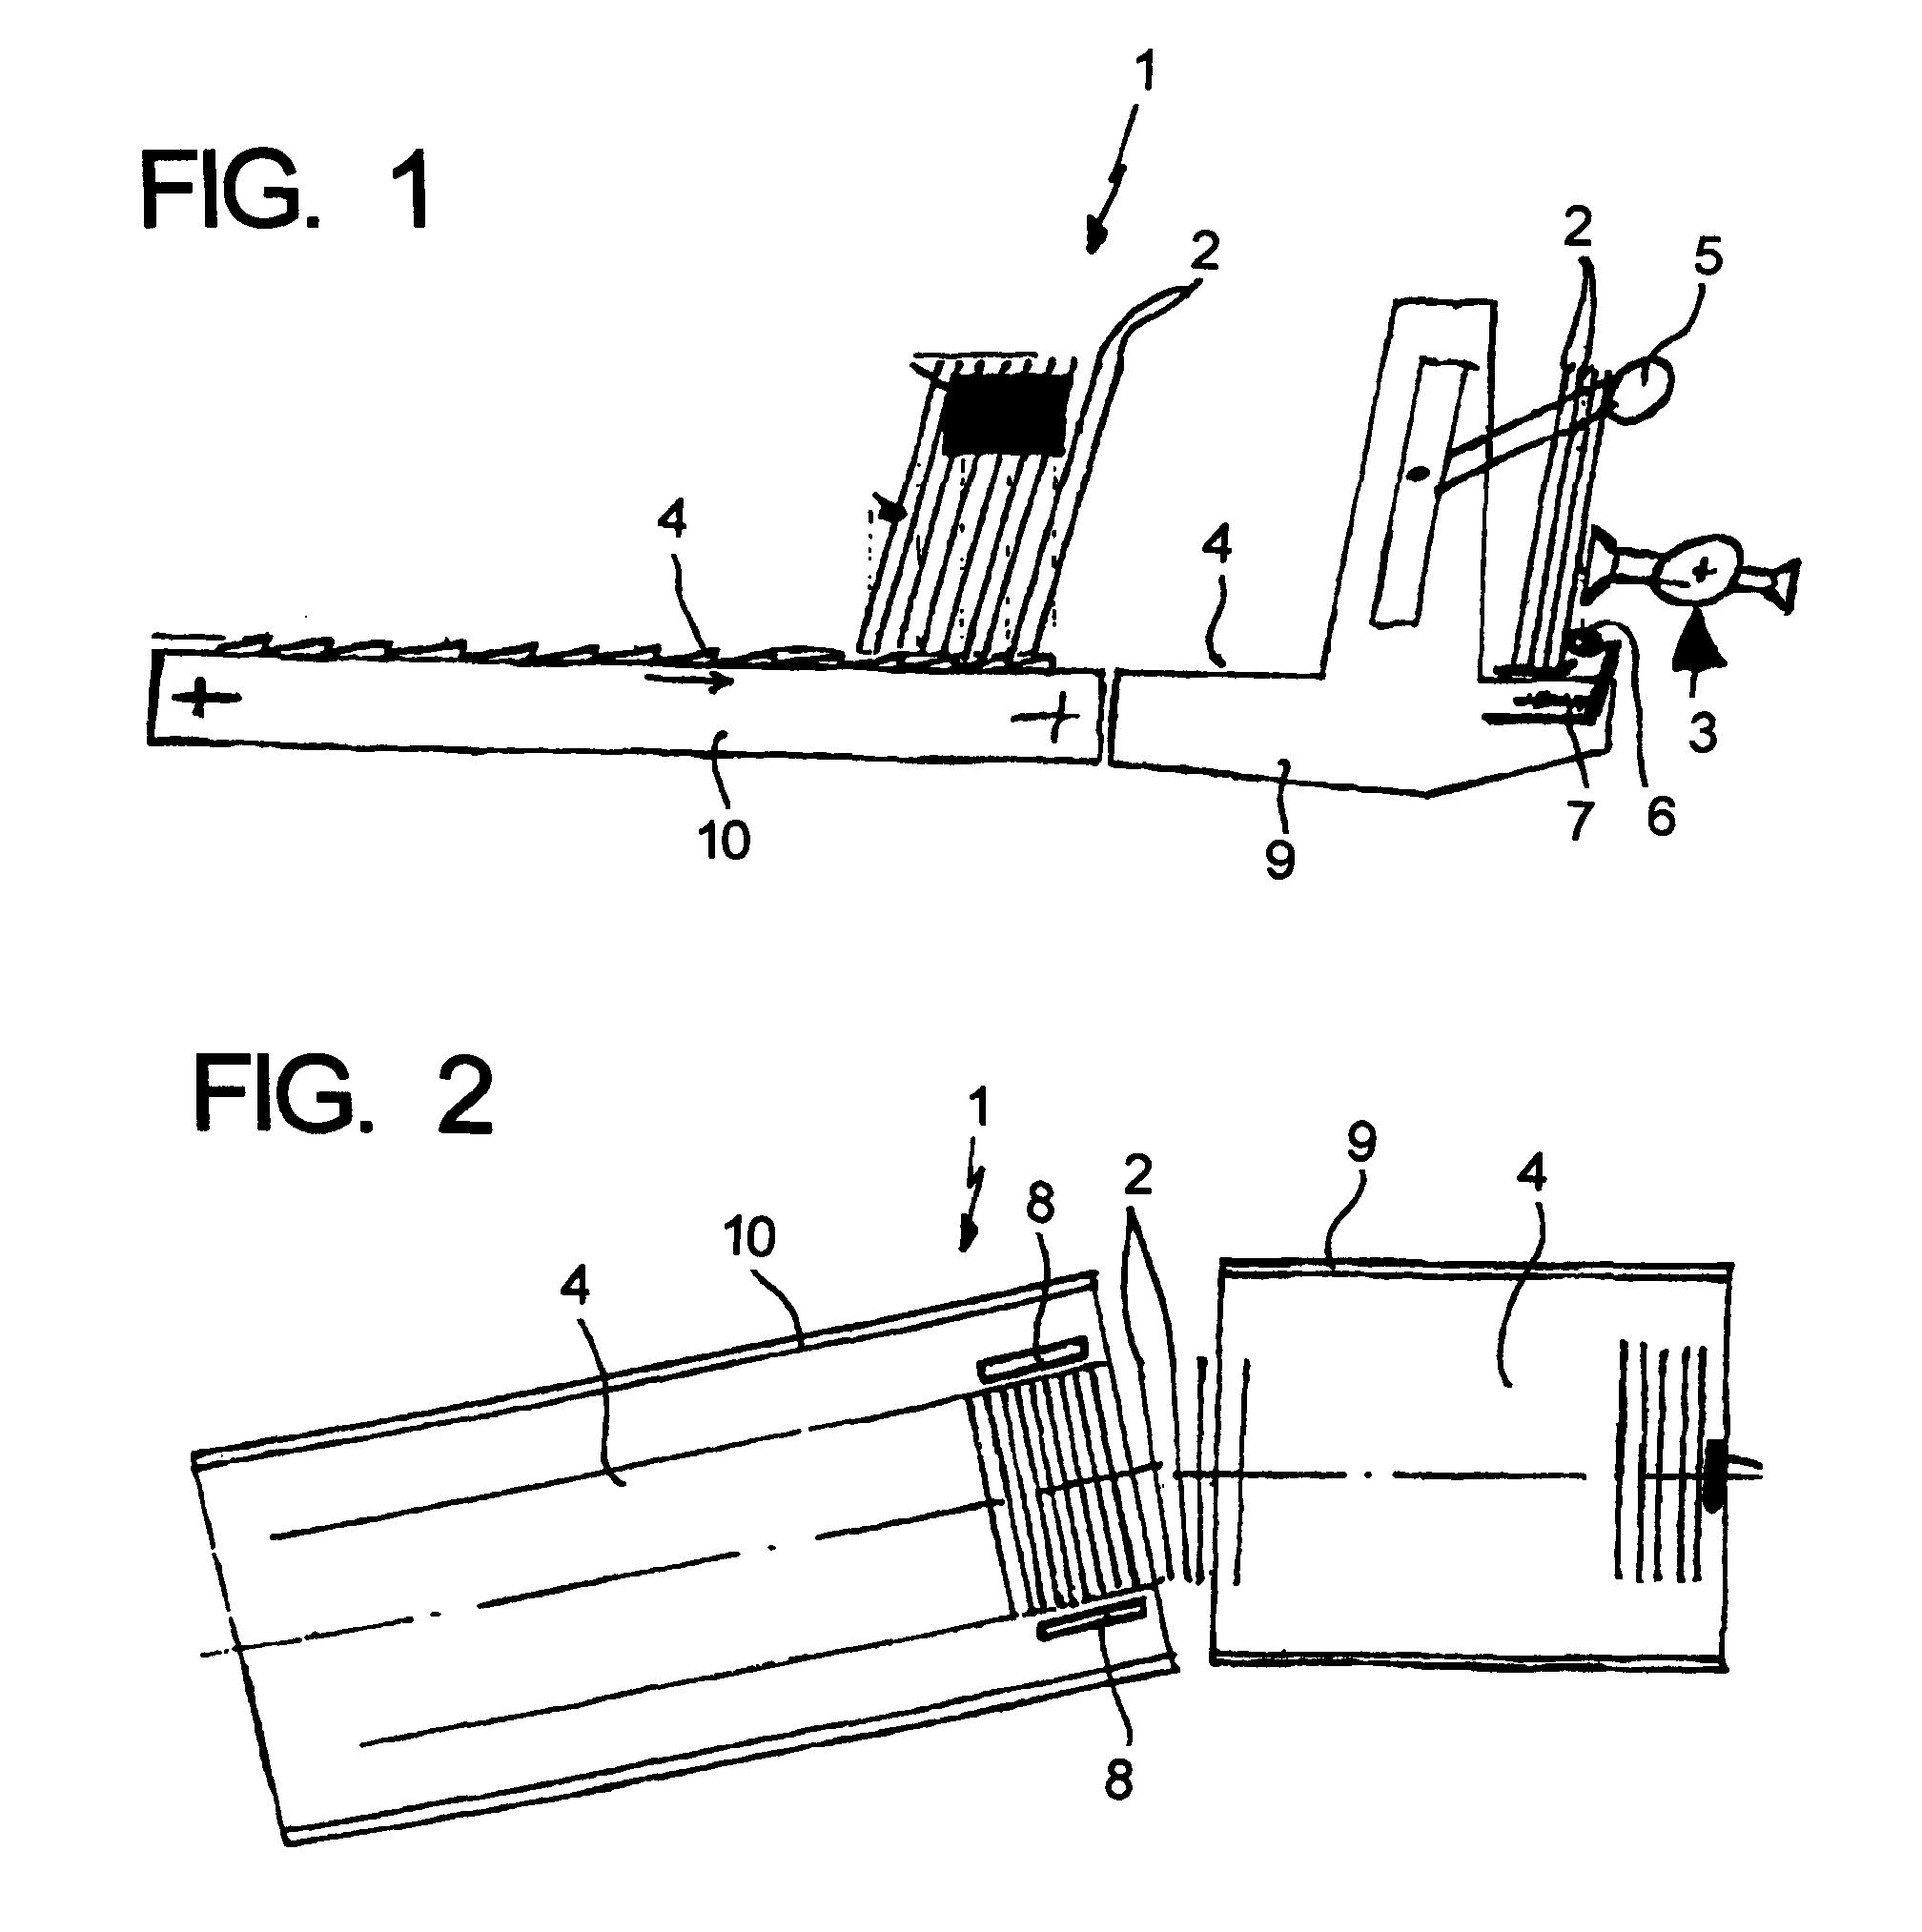 Method of feeding flattened cardboard cartons in a carton opening machine in a bottle, container, or article packaging plant, and a device therefor